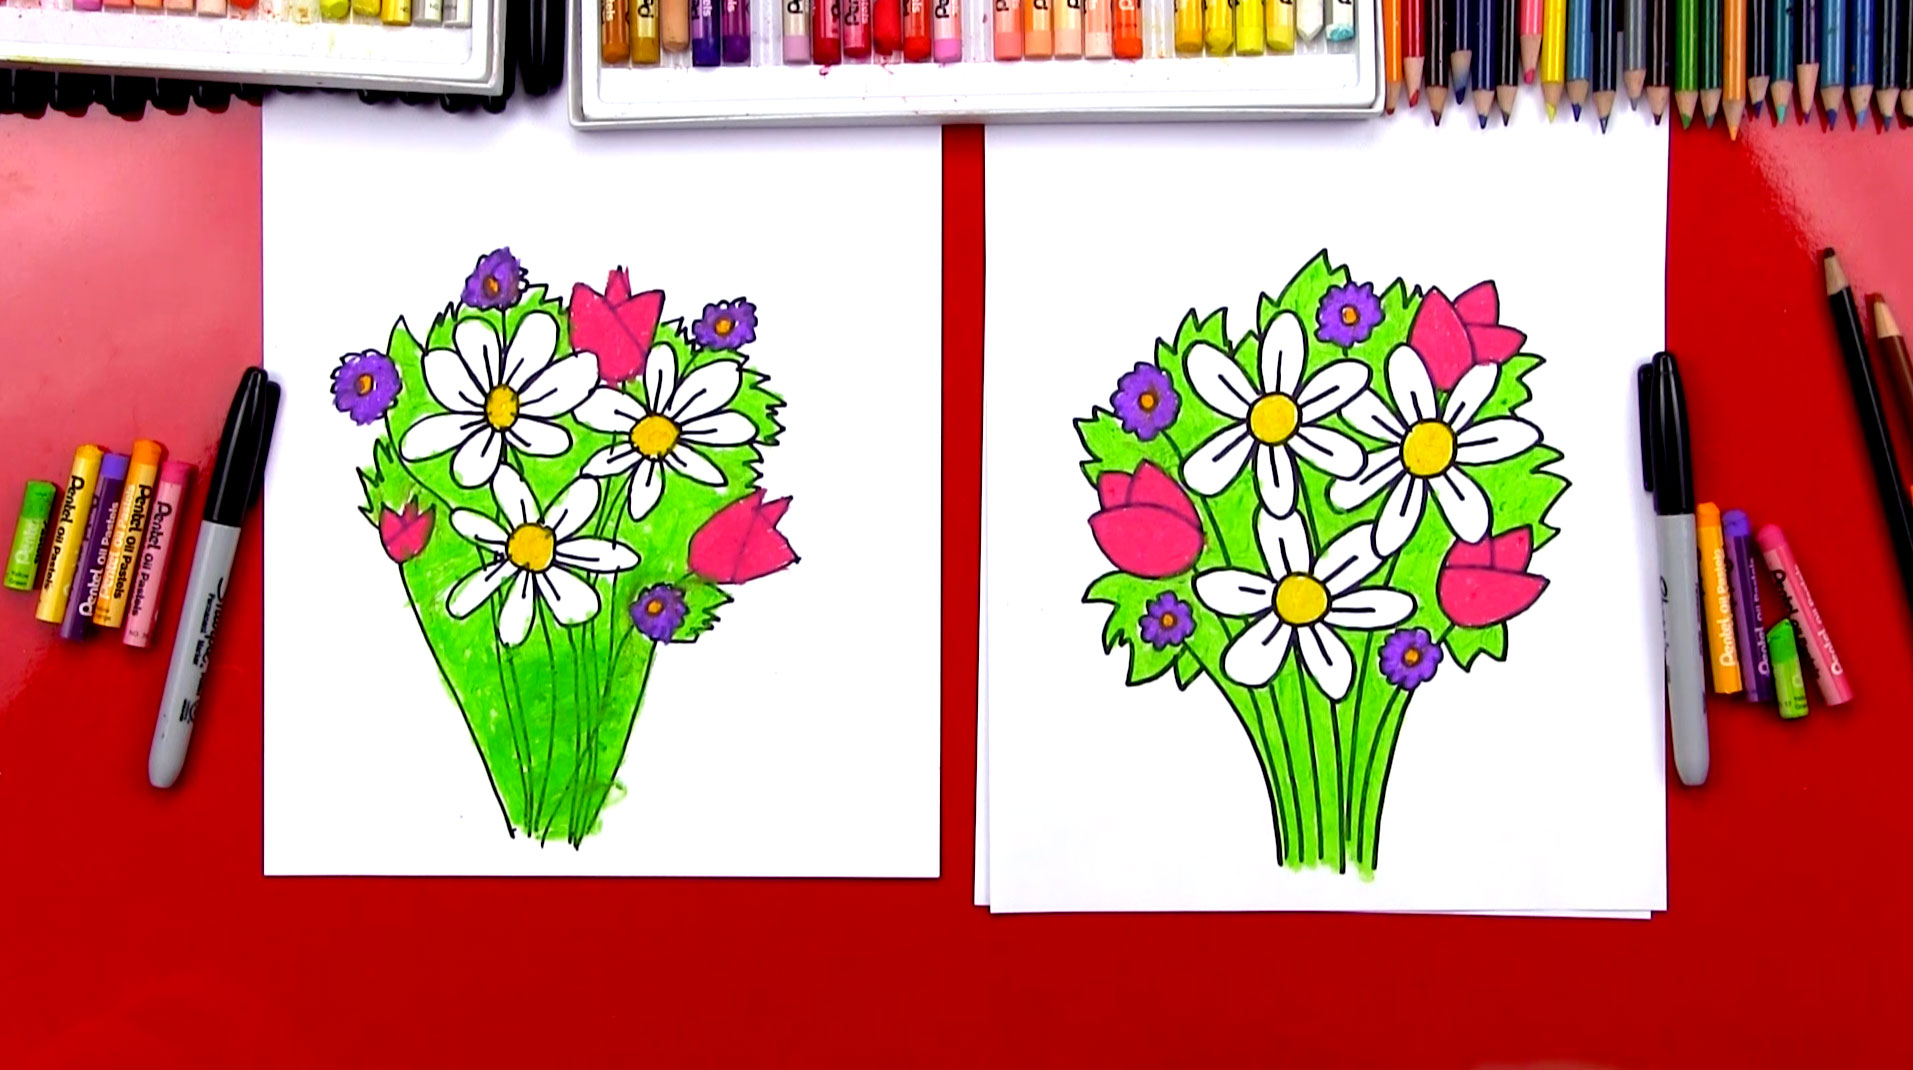 How to Draw a Bouquet of Flowers - Let's Draw Today